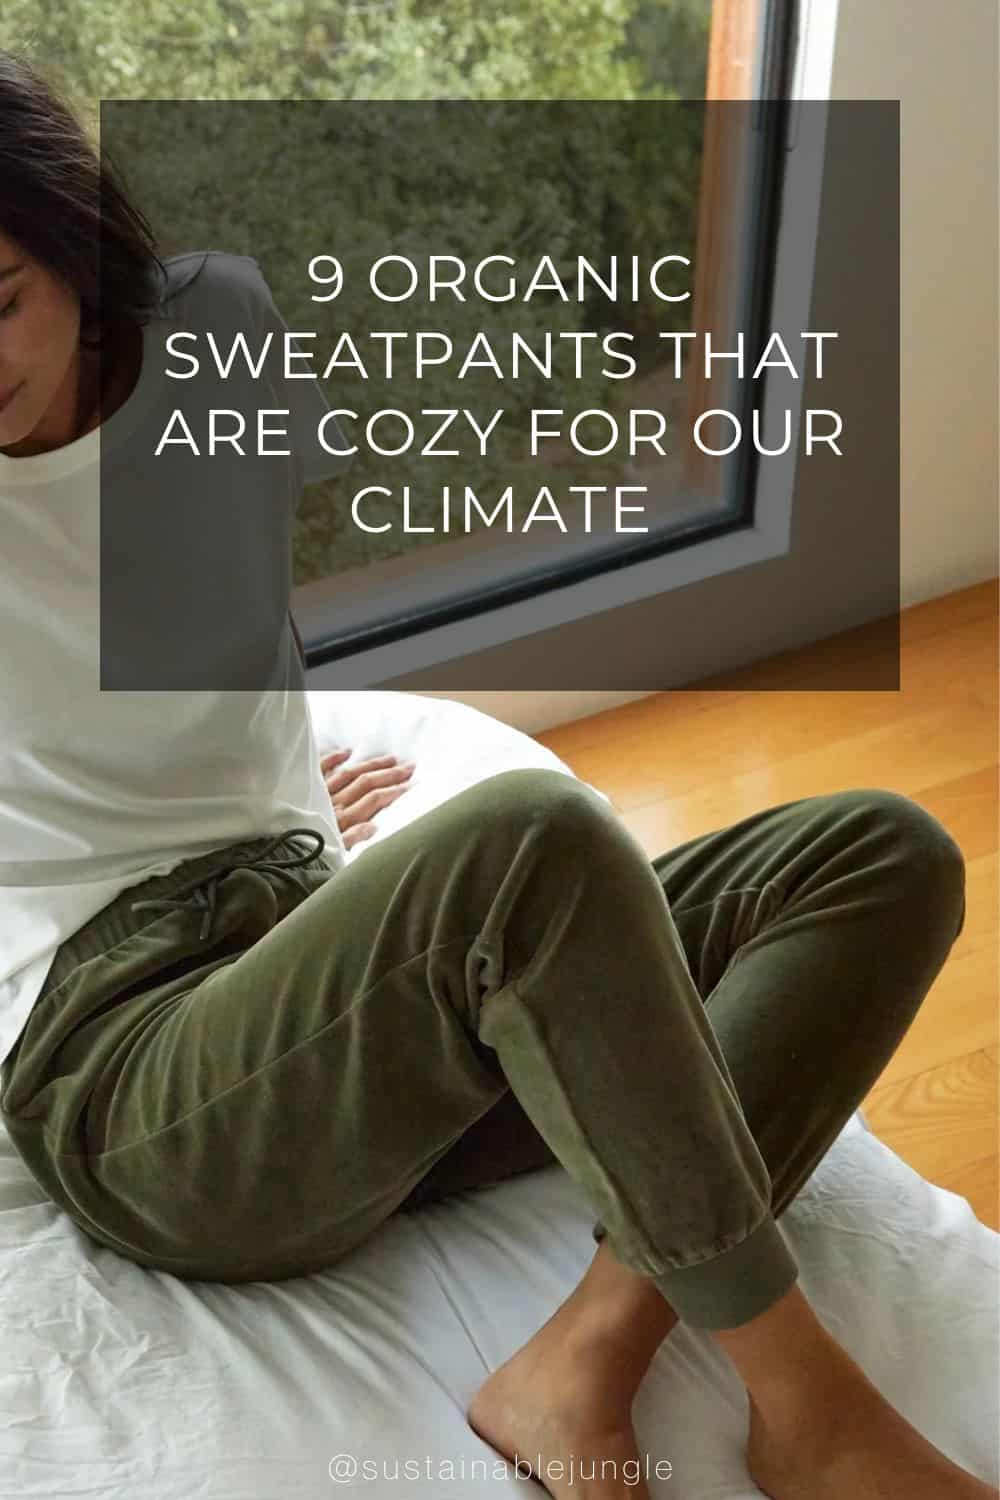 9 Organic Sweatpants That Are Cozy For Our Climate Image by Outerknown #organicsweatpants #organiccottonsweatpants #organiccottonsweats #mensorganicsweatpants #organiccottonsweatpantswomens #organiccozysweatpants #sustainablejungle